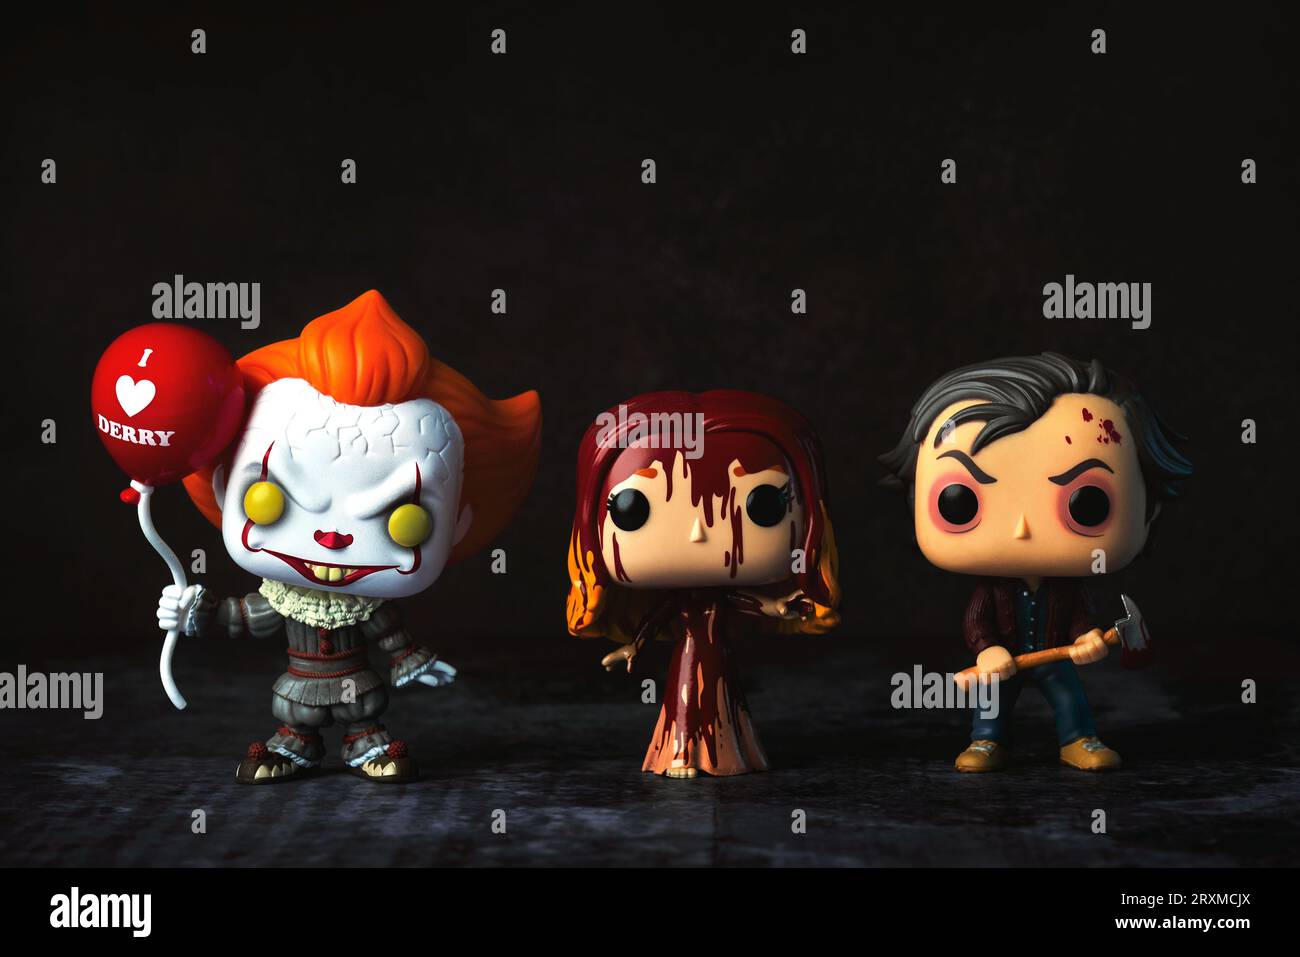 Funko POP vinyl figures of Pennywise, Carrie and Jack Torrance fictional characters from Stephen King books over grunge background. Illustrative edito Stock Photo